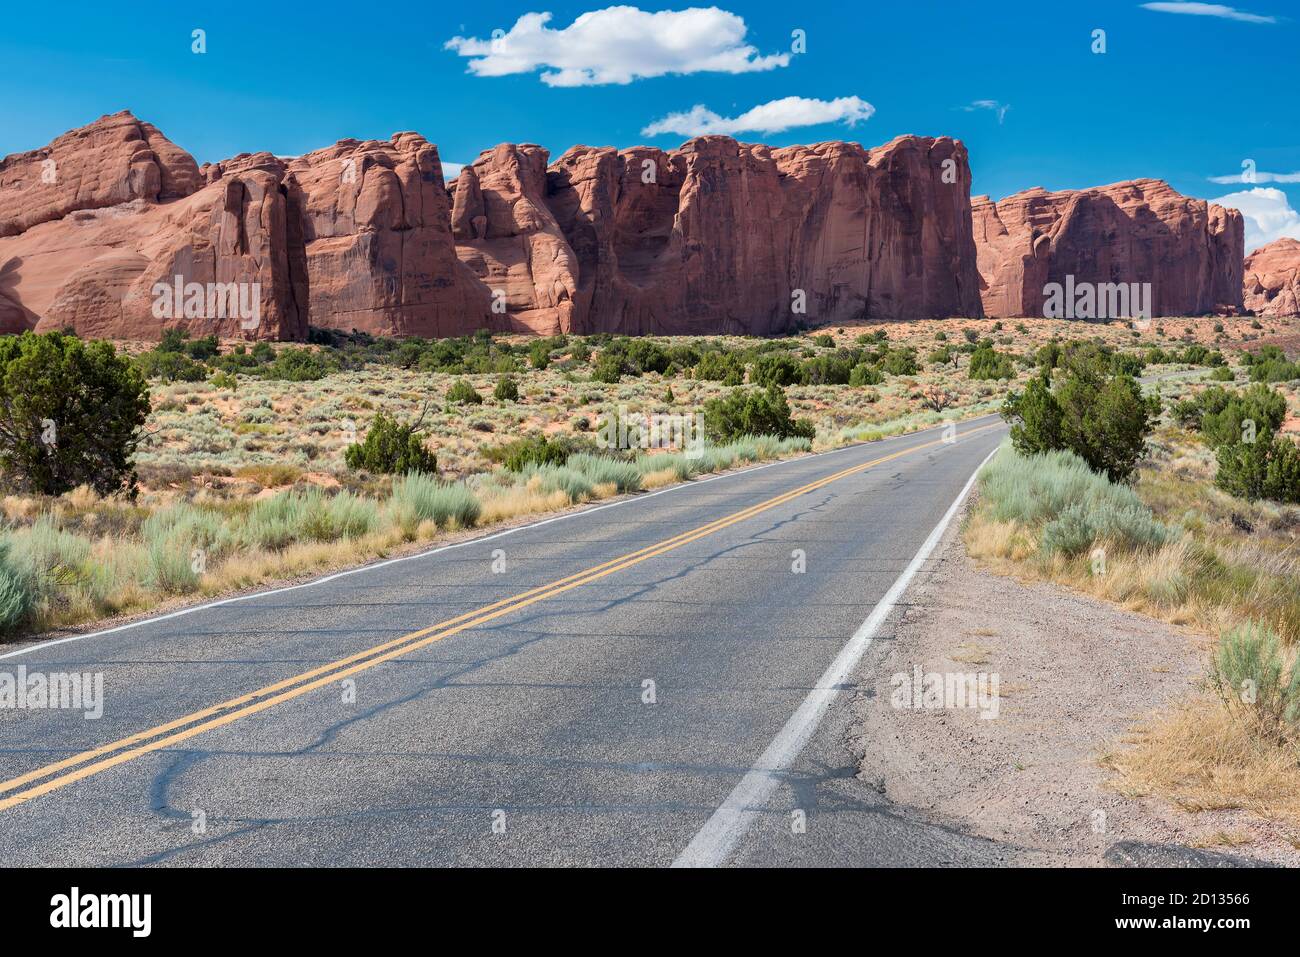 American Highway in Arches National Park, Utah, USA Stock Photo